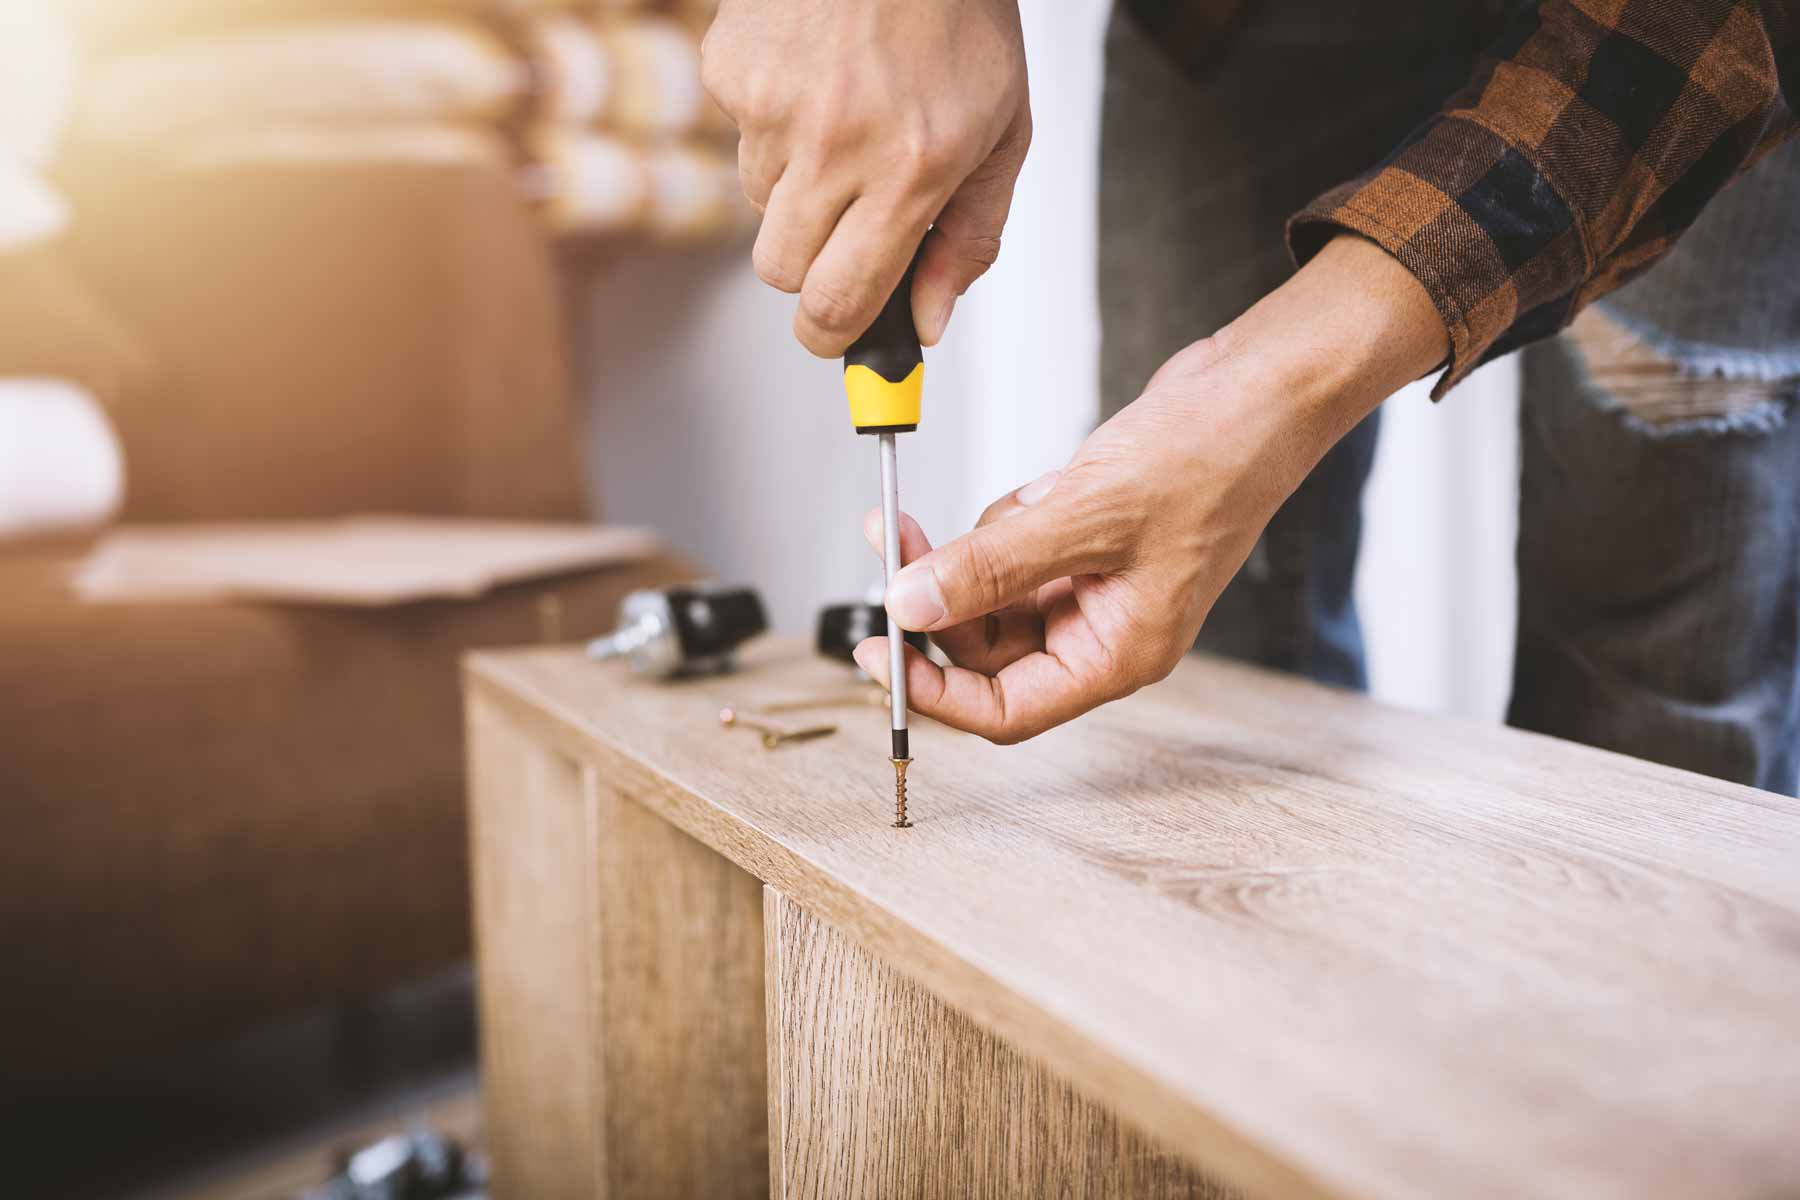 Find a home repair contractor near you